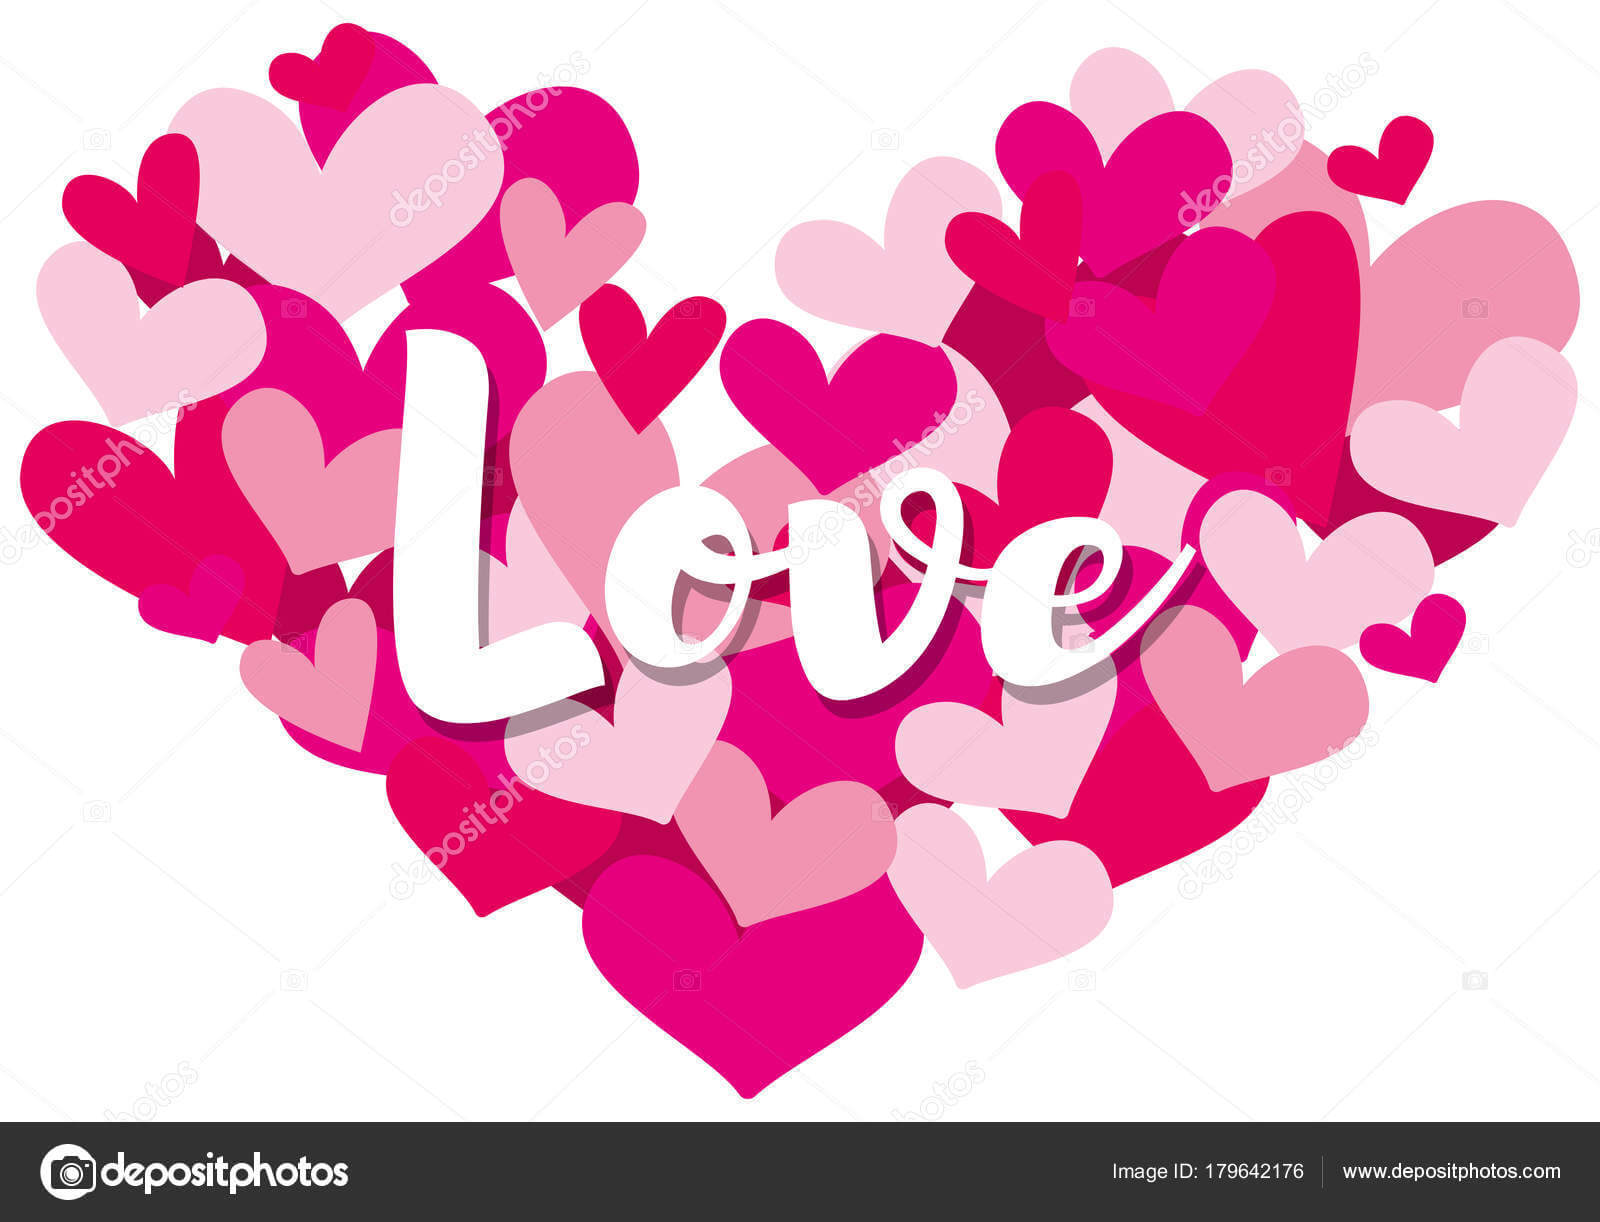 Velentine Card Template With Word Love On Heart Shapes Within Valentine Card Template Word